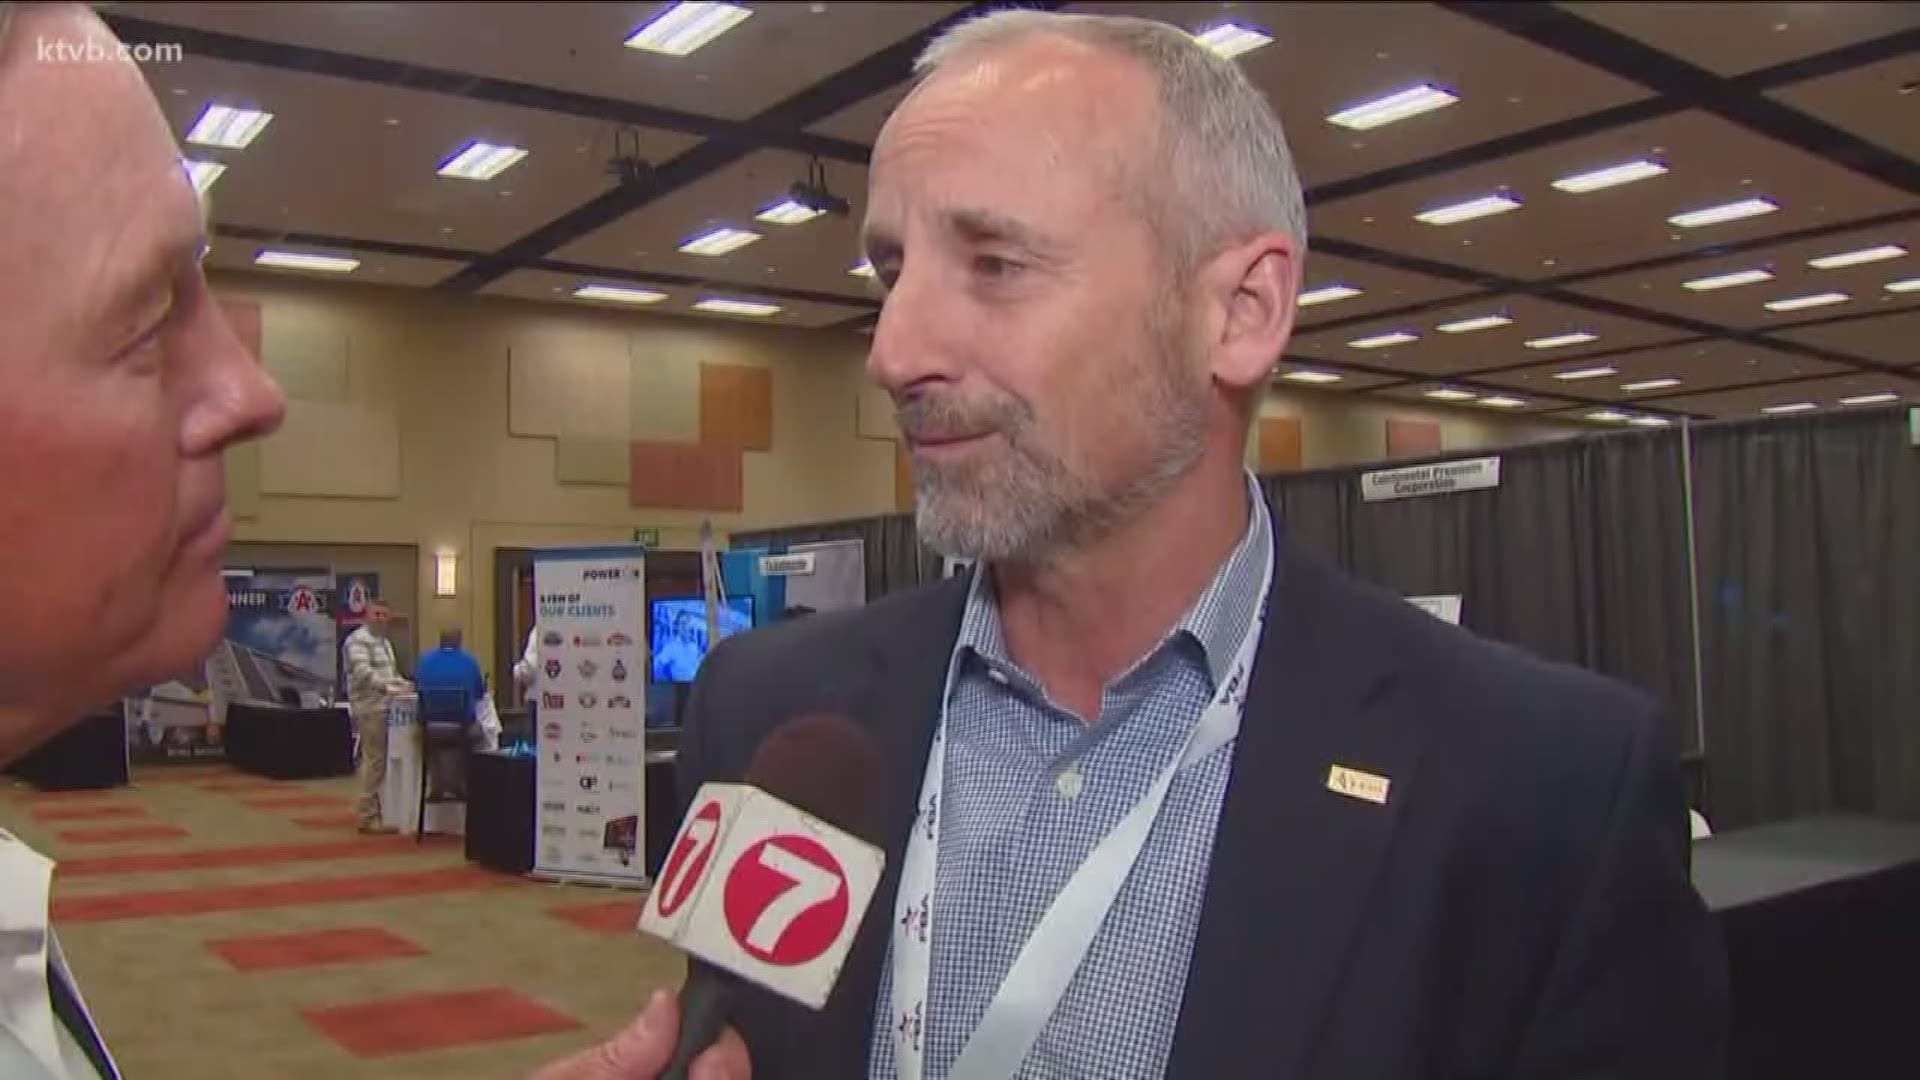 Mark talks with Famous Idaho Potato Bowl Executive Director Kevin McDonald, who played an important role in bringing the Football Bowl Association's annual meeting to Boise.